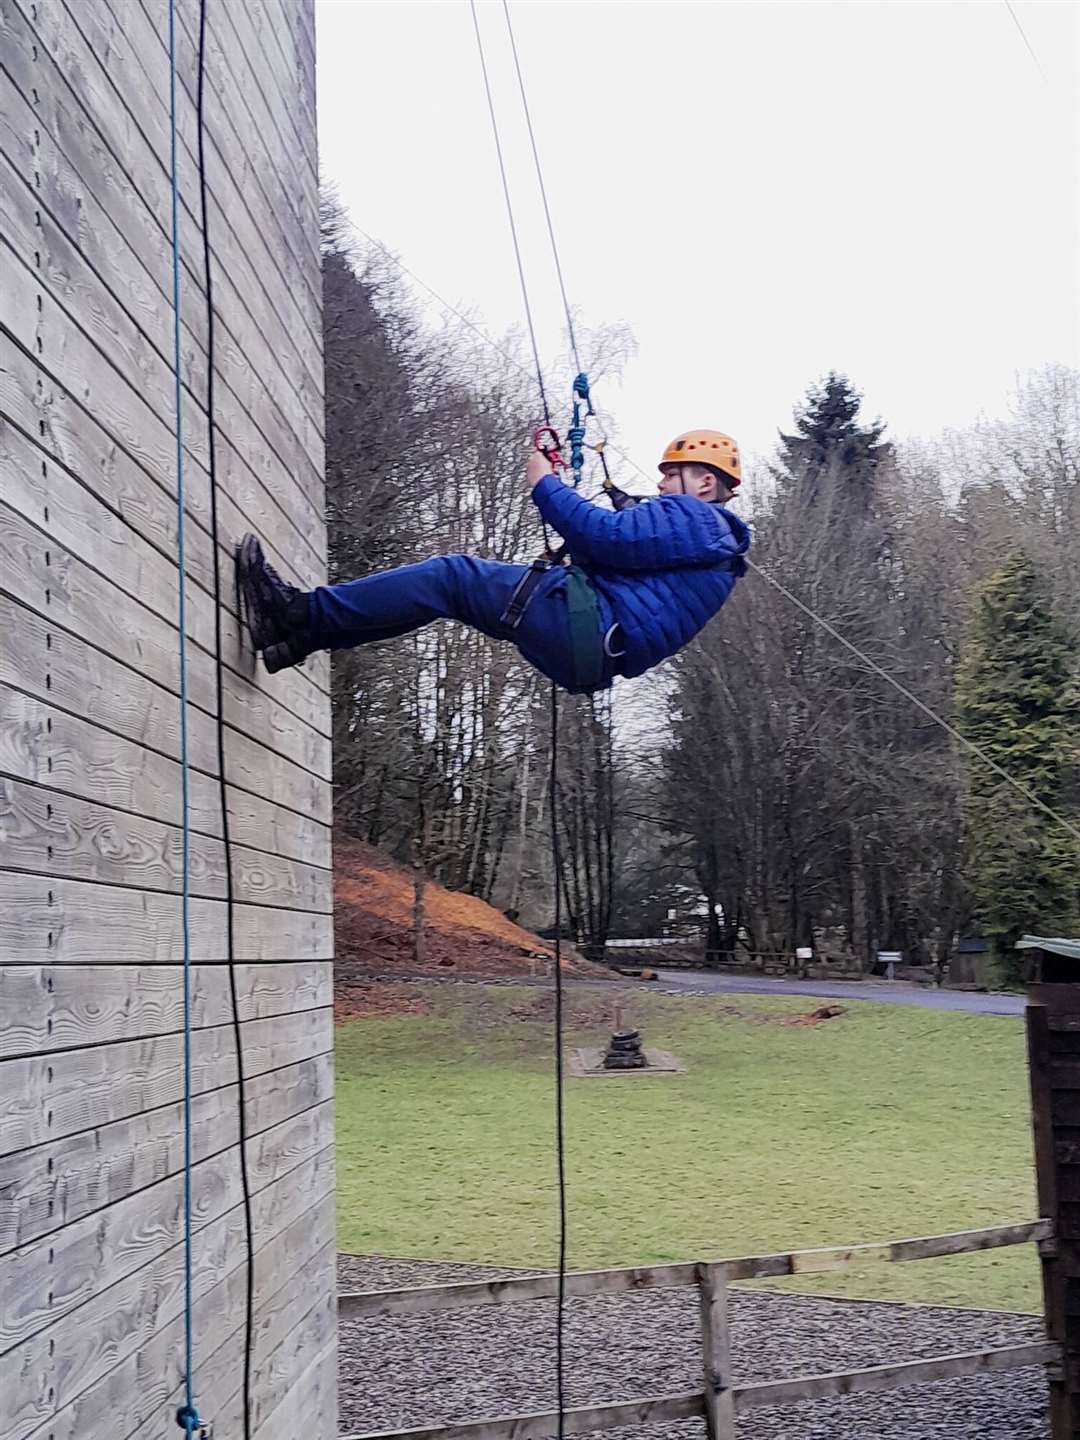 Quinn Greaves-Newall having a go at abseiling.